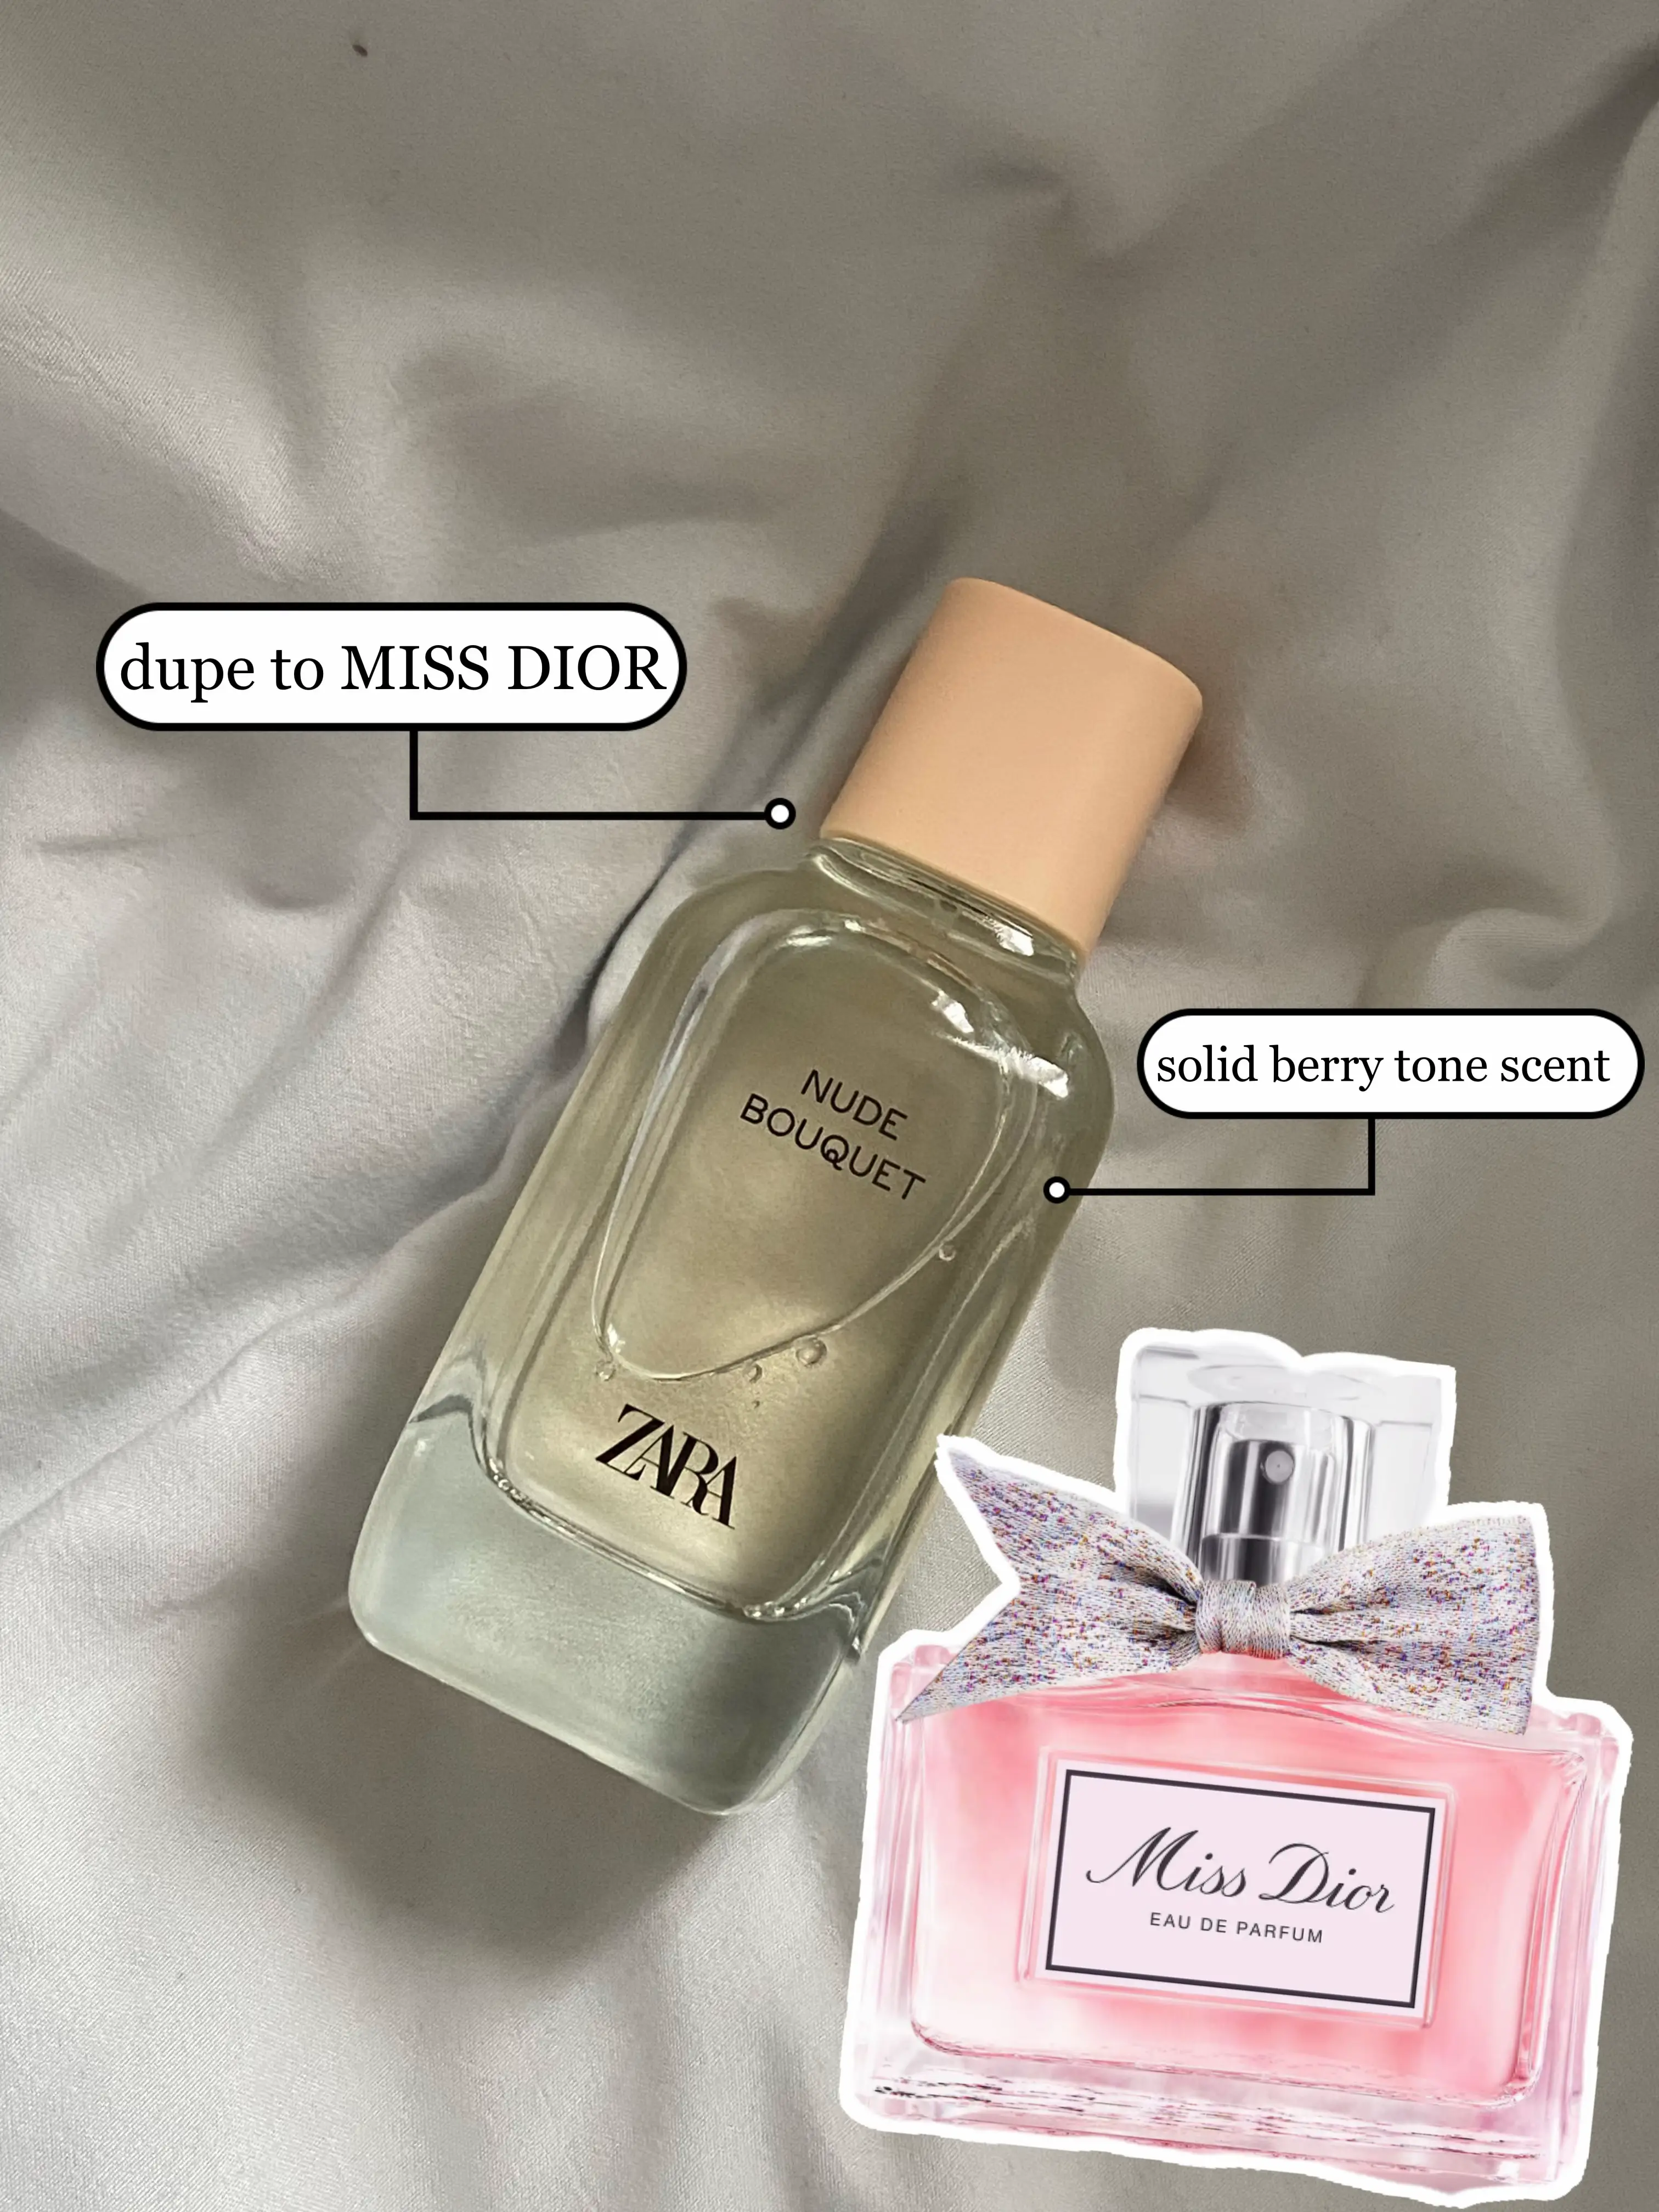 CHANEL CHANCE EAU TENDRE DUPE & MISS DIOR BLOOMING BOUQUET DUPE ALTERNATIVE